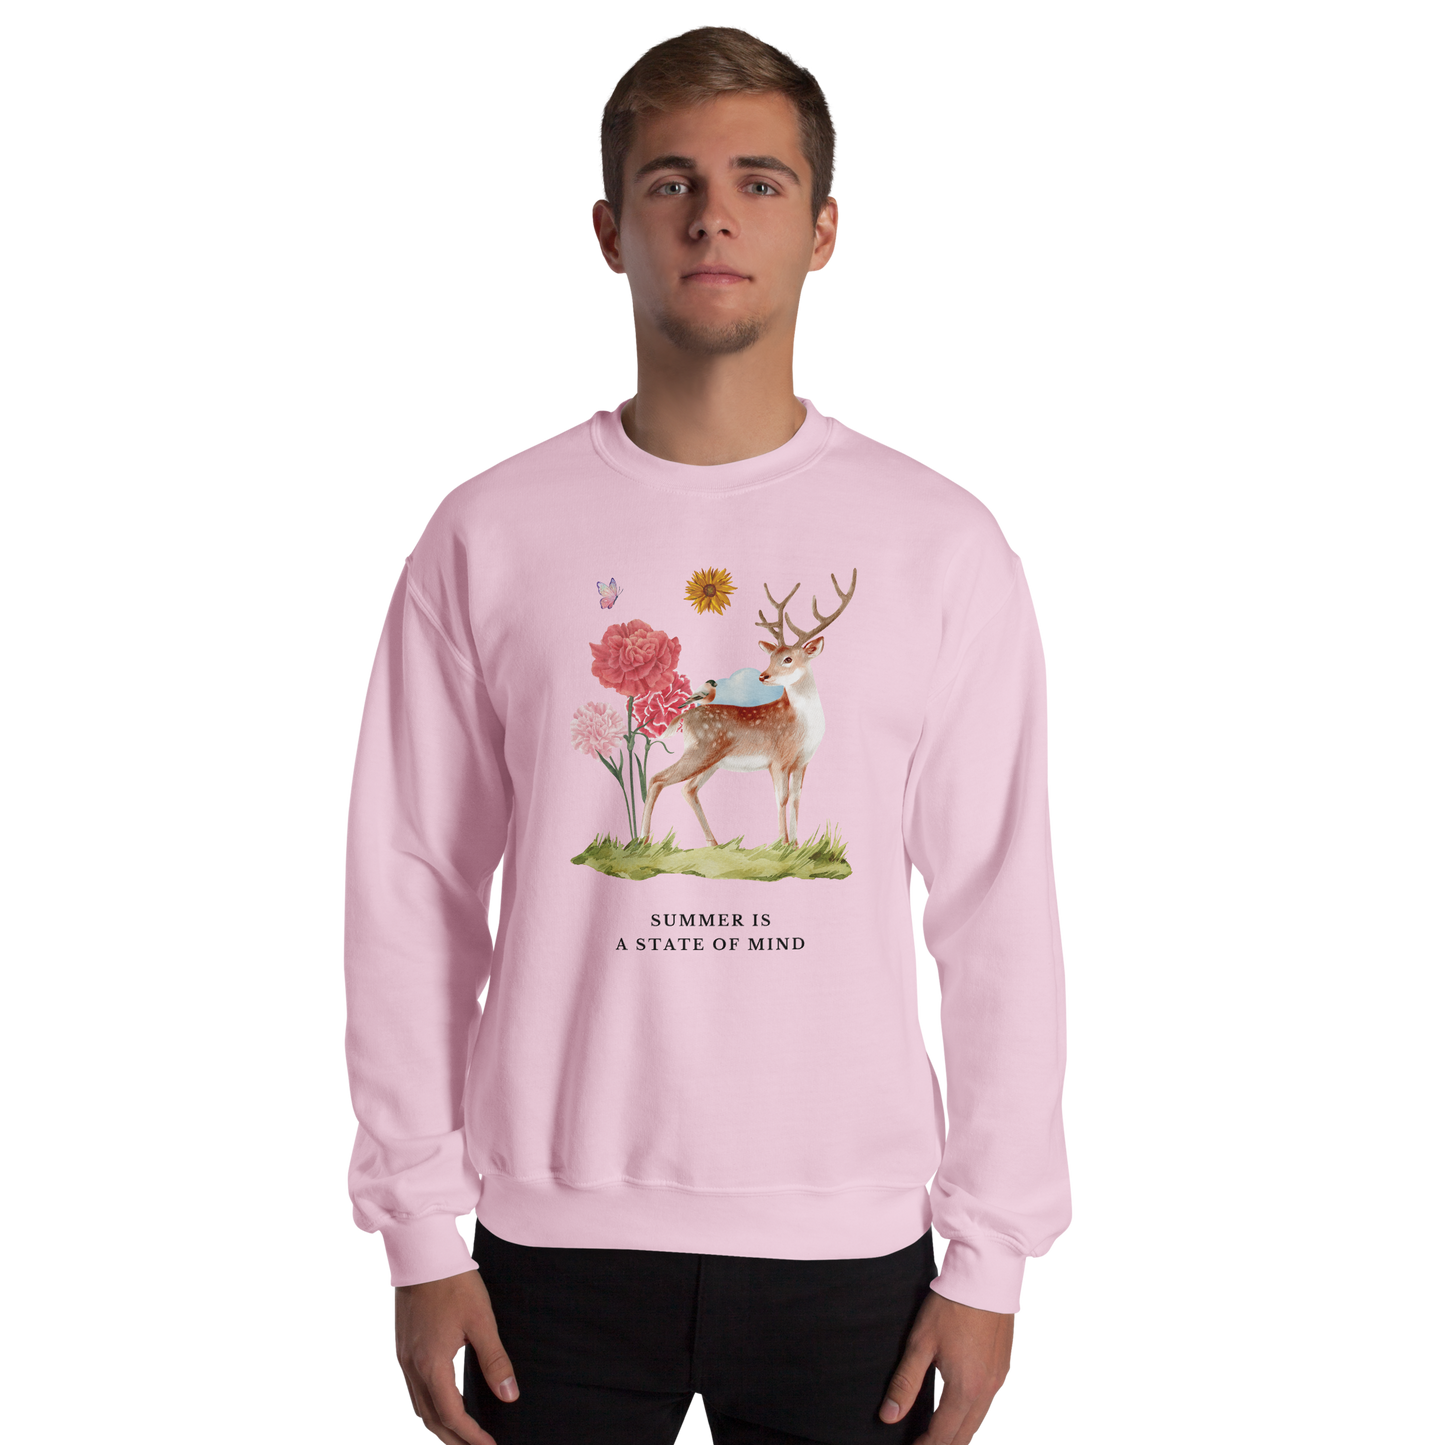 Man wearing a Light Pink Summer Is a State of Mind Sweatshirt featuring a Summer Is a State of Mind graphic on the chest - Cute Graphic Summer Sweatshirts - Boozy Fox